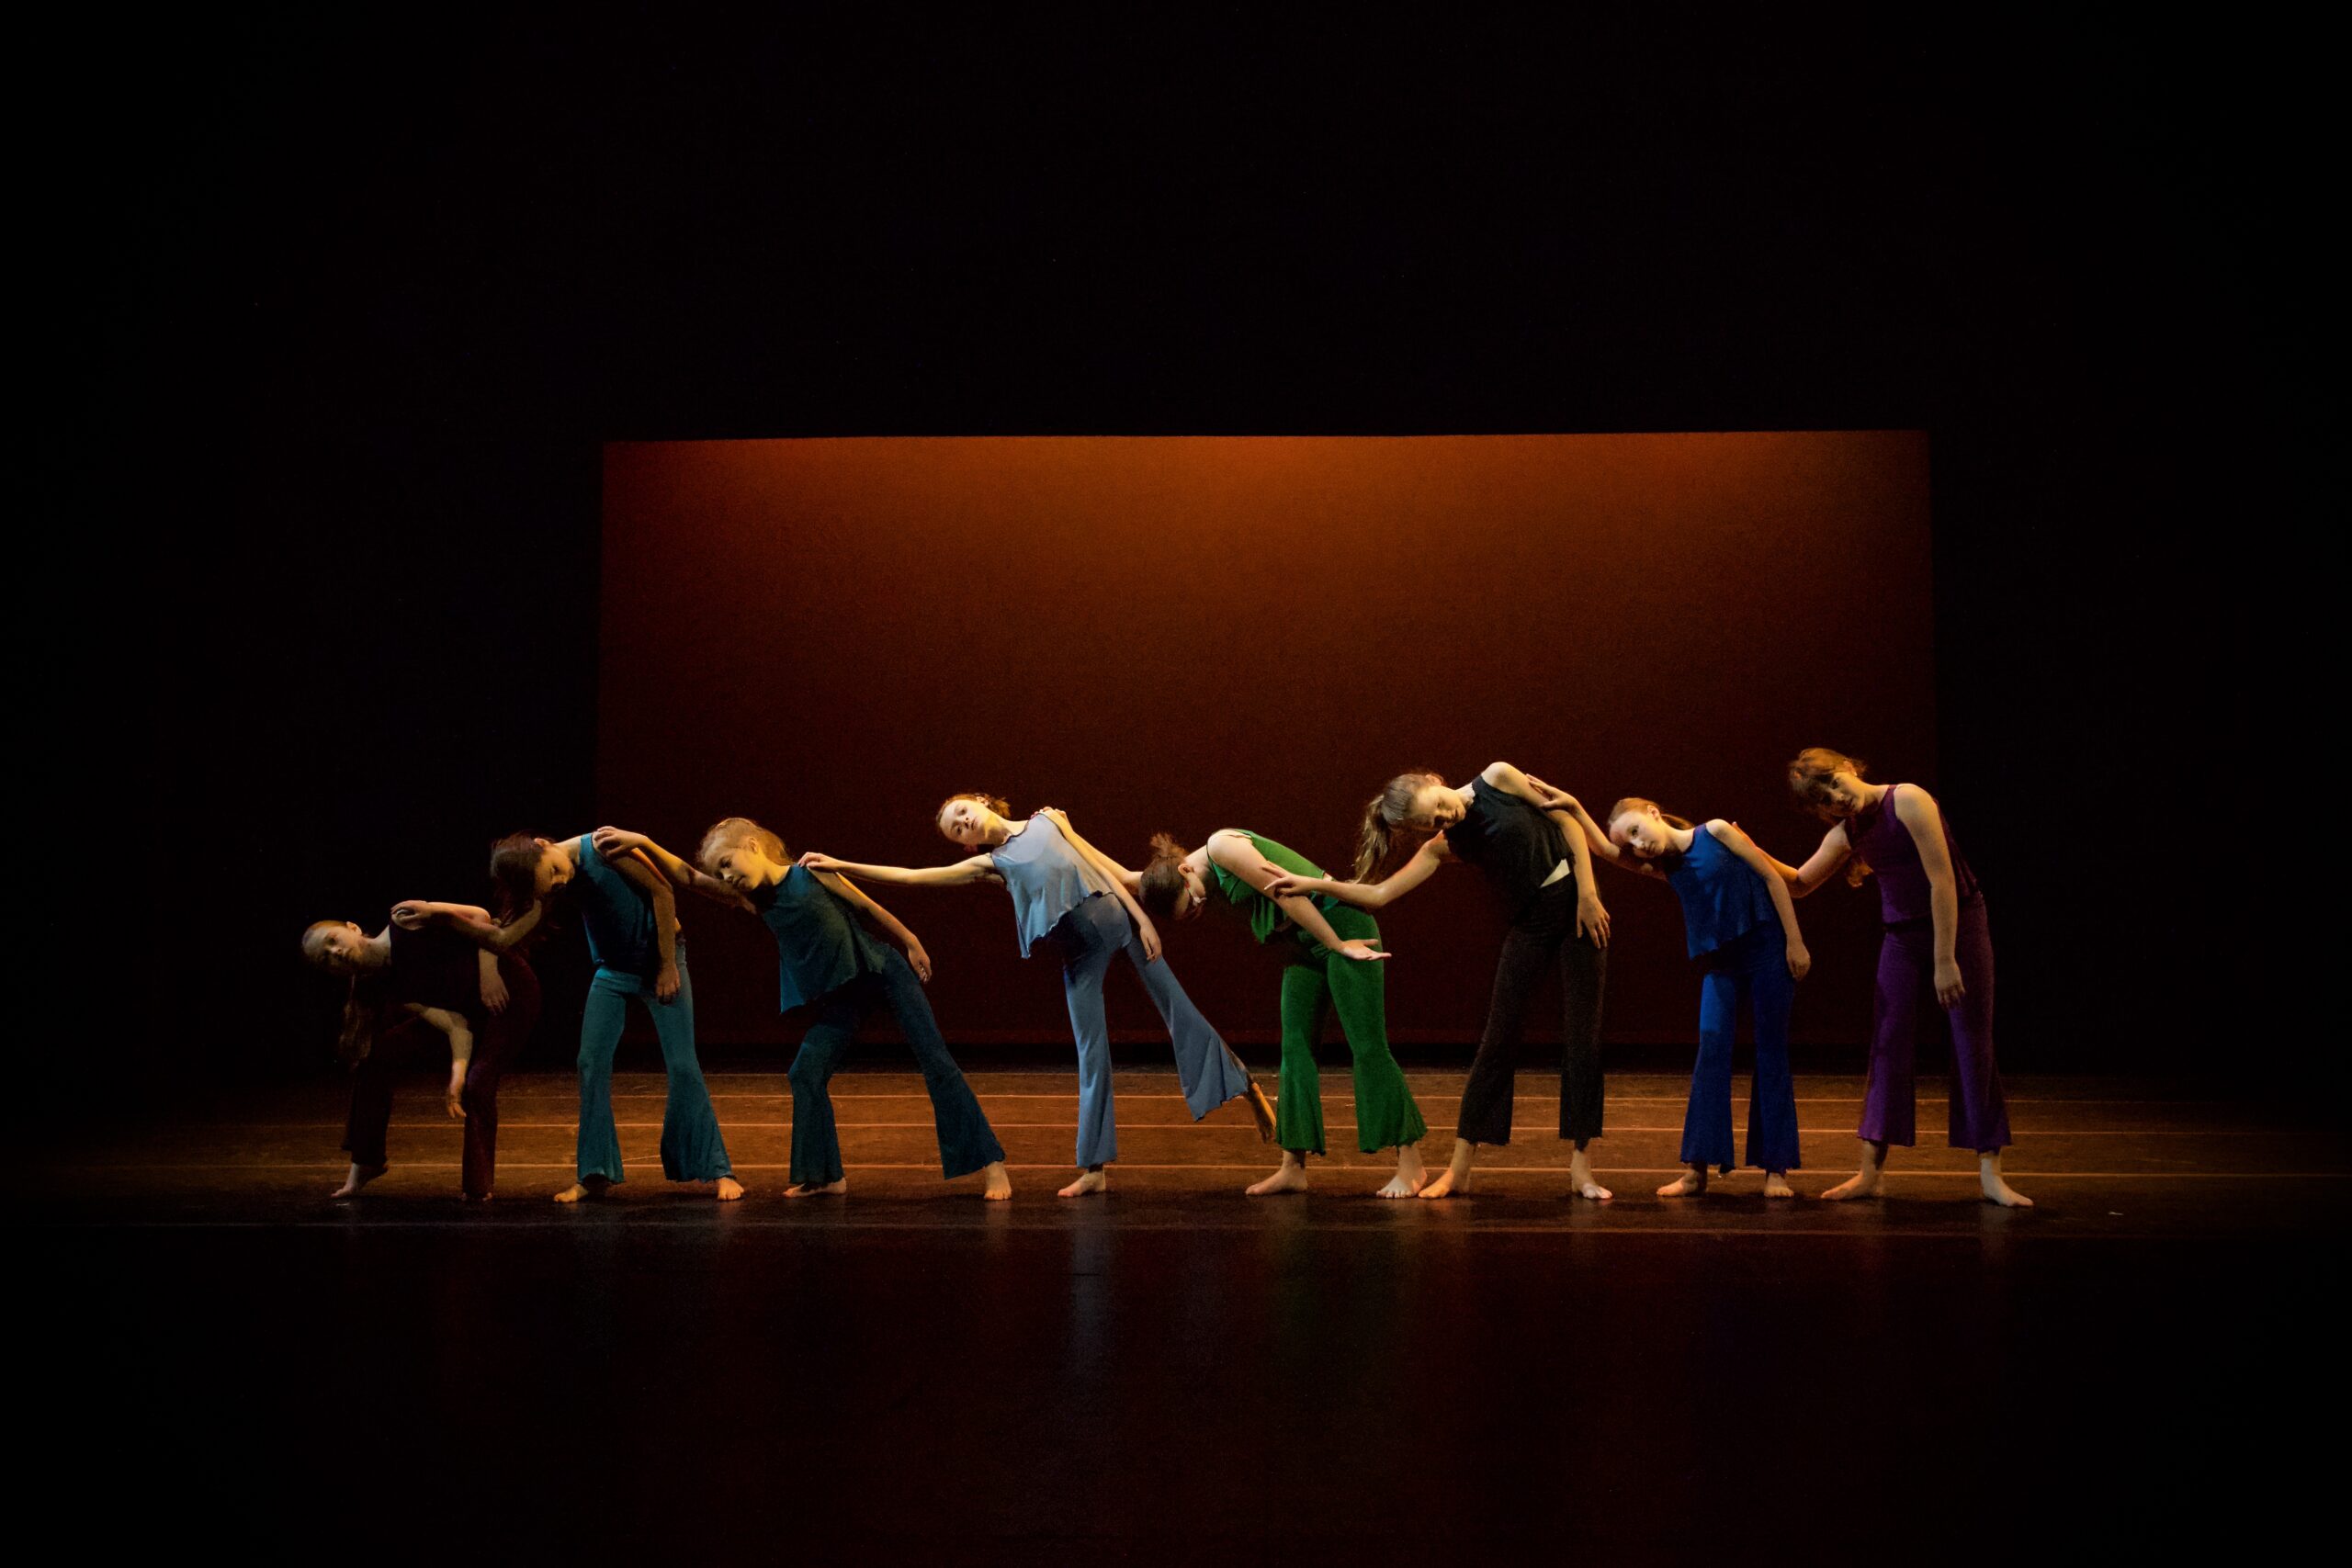 A line of dancers wearing blues, greens, and purples leaning on each other. They stand on a stage with orange lighting.